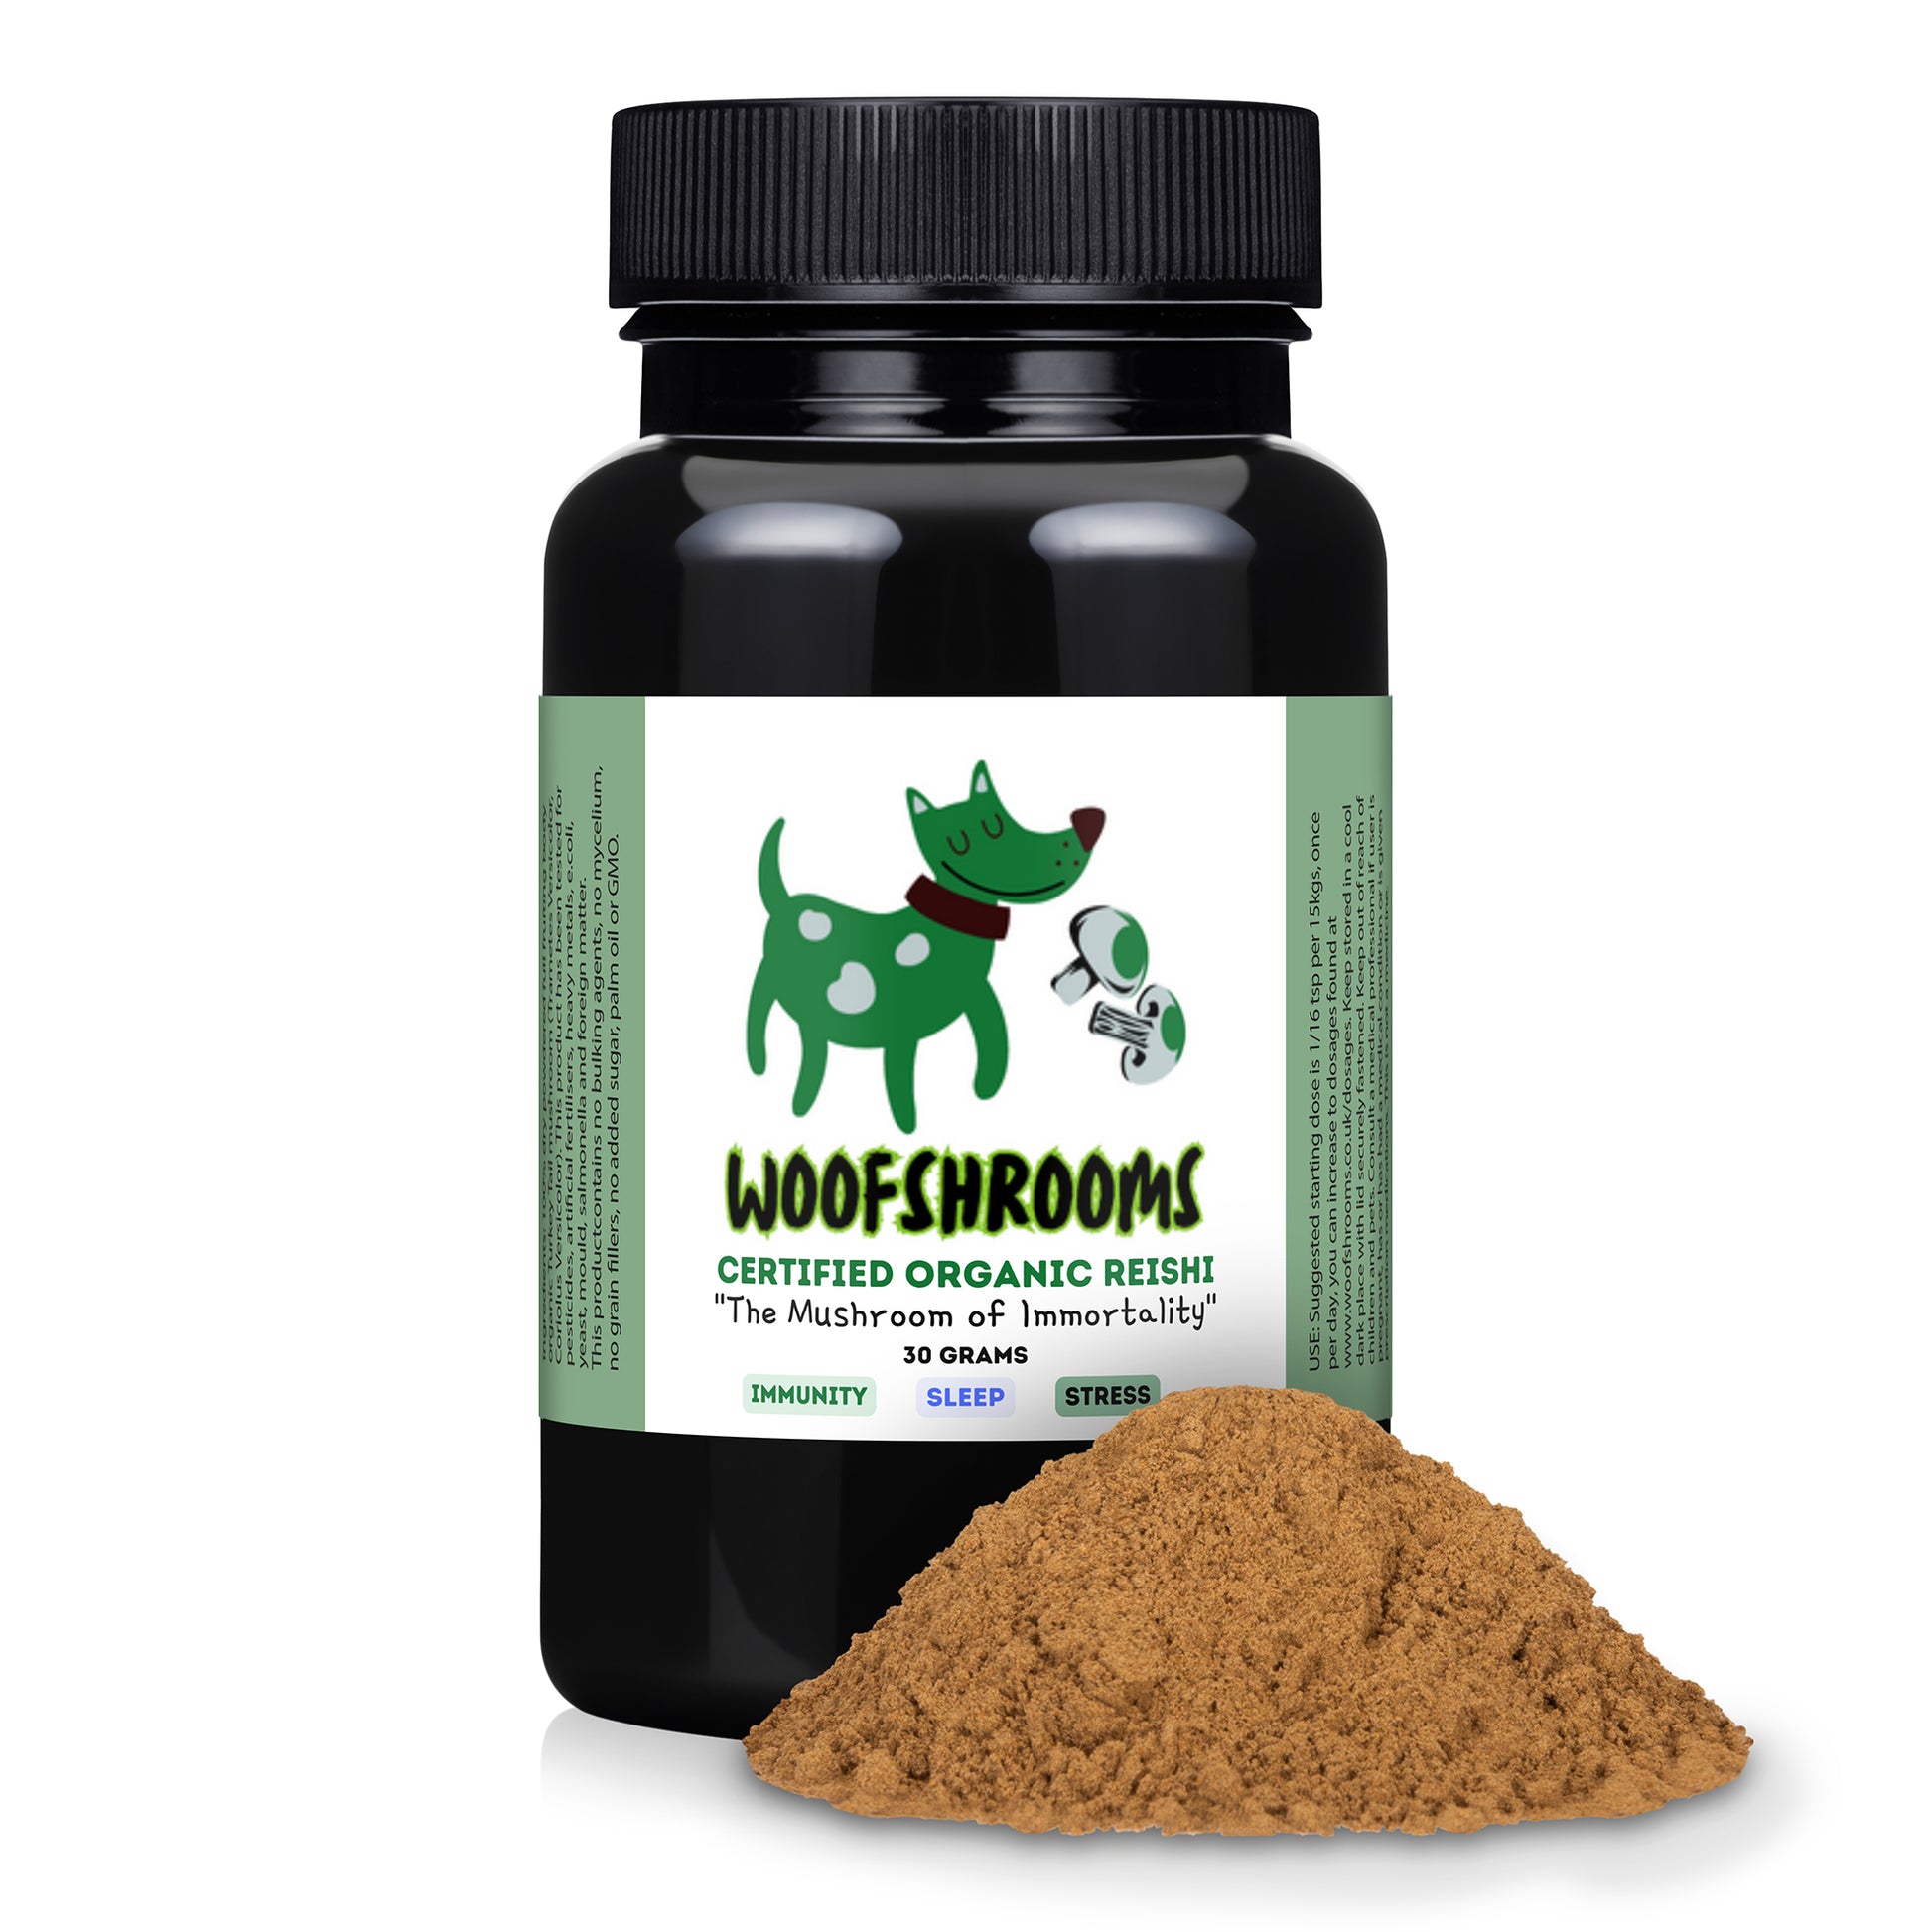 Reishi supplement for dogs that promotes sleep and helps with anxiety.